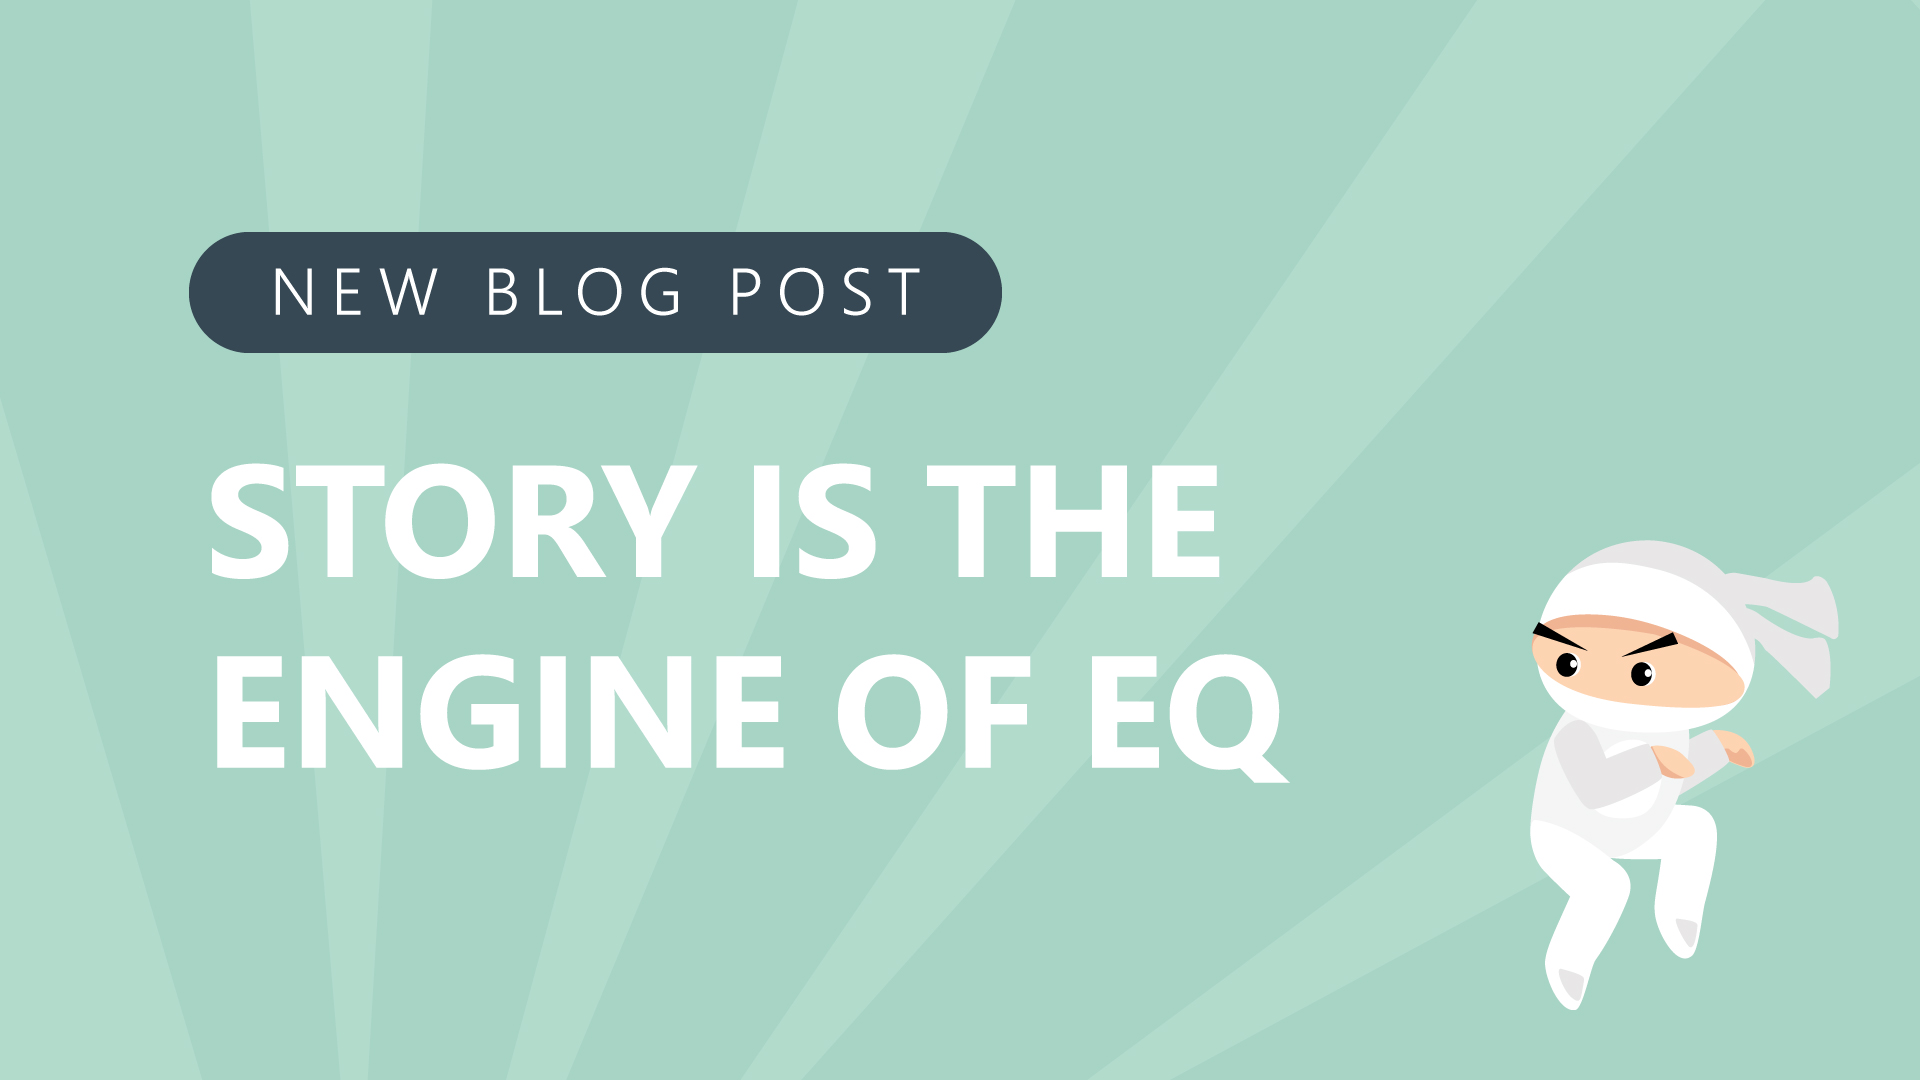 Story is the engine of EQ